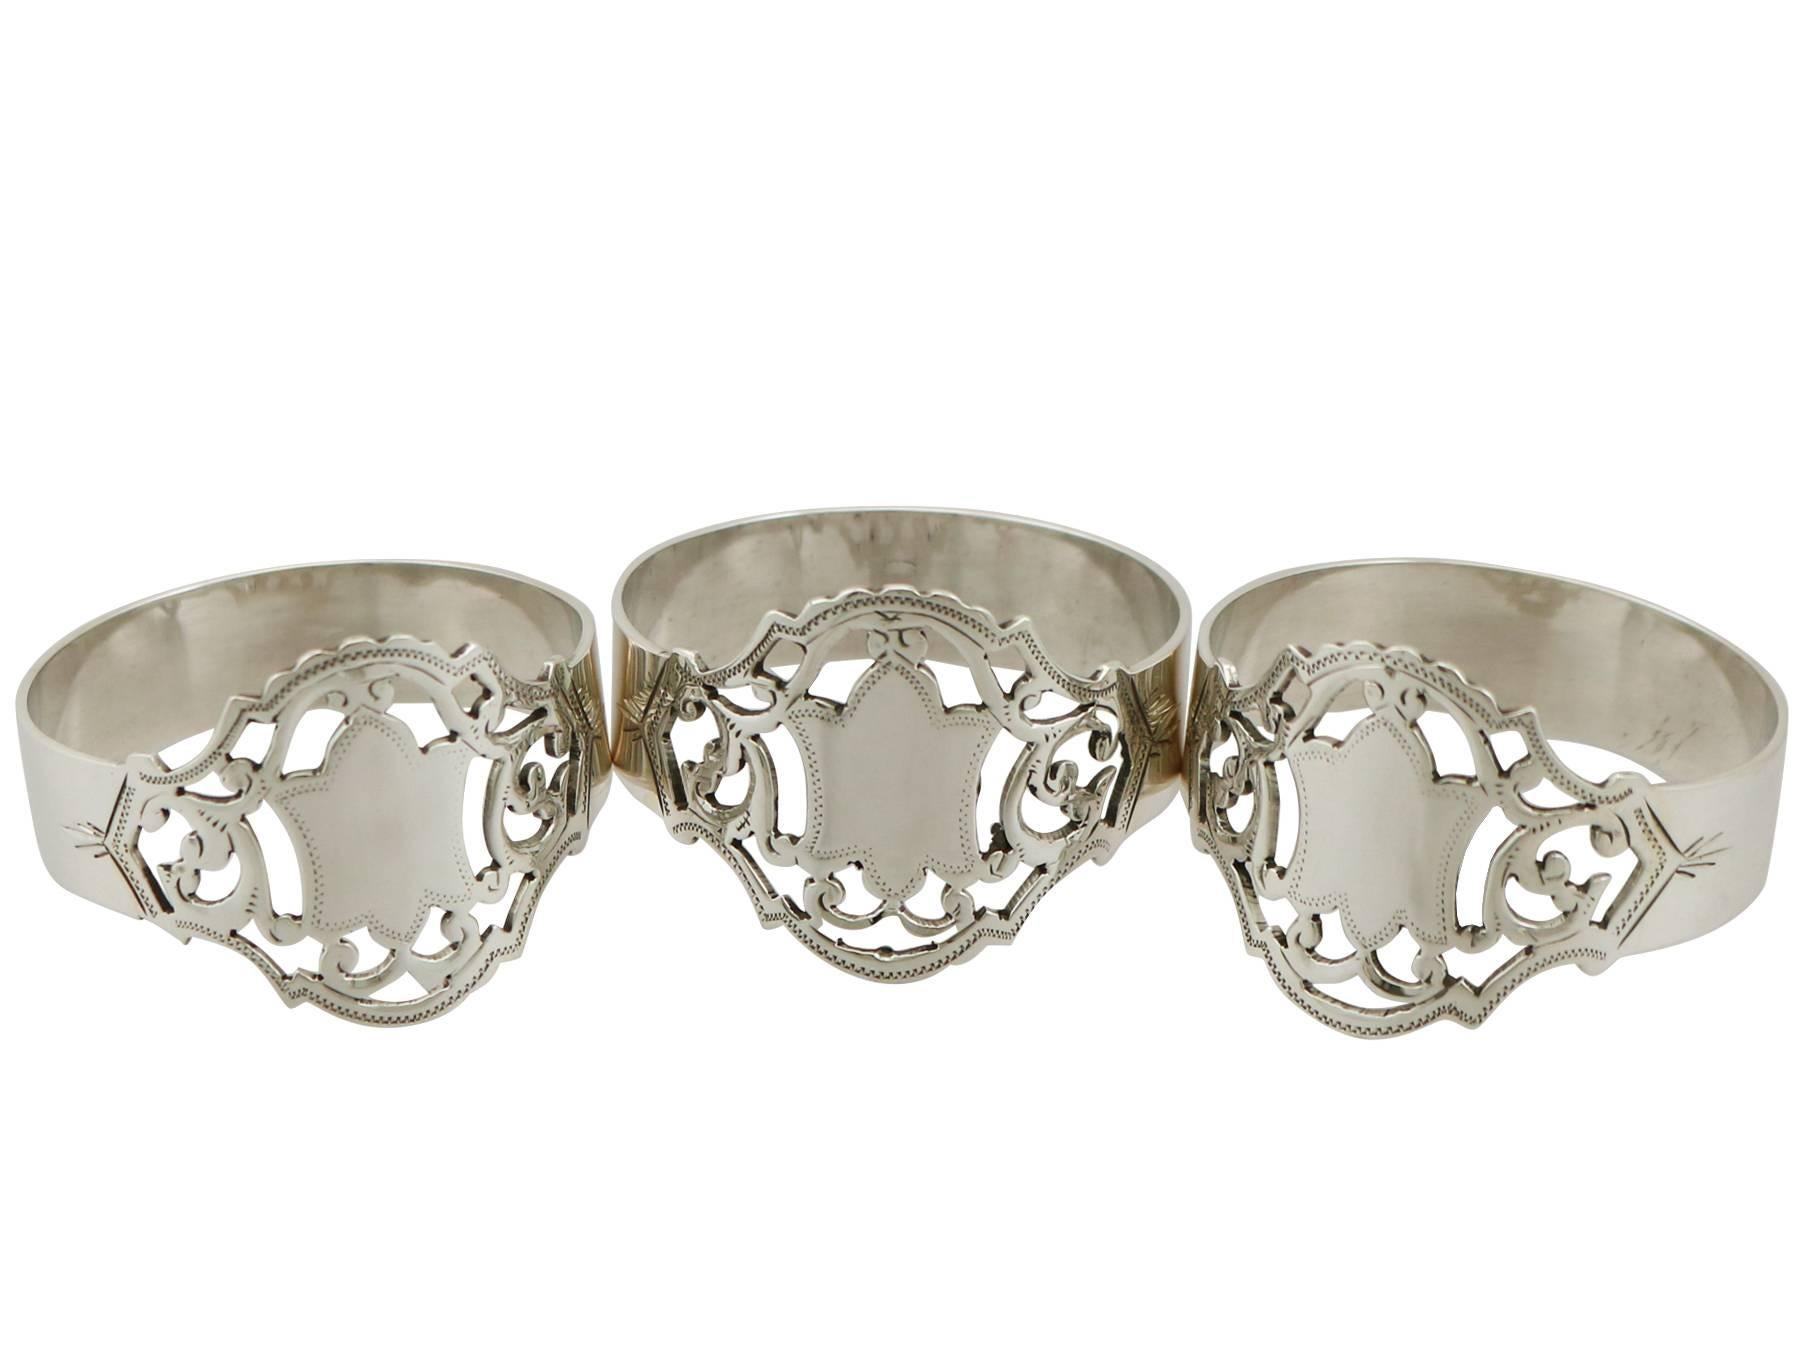 English Antique Edwardian 1900s Sterling Silver Napkin Rings Set of Six